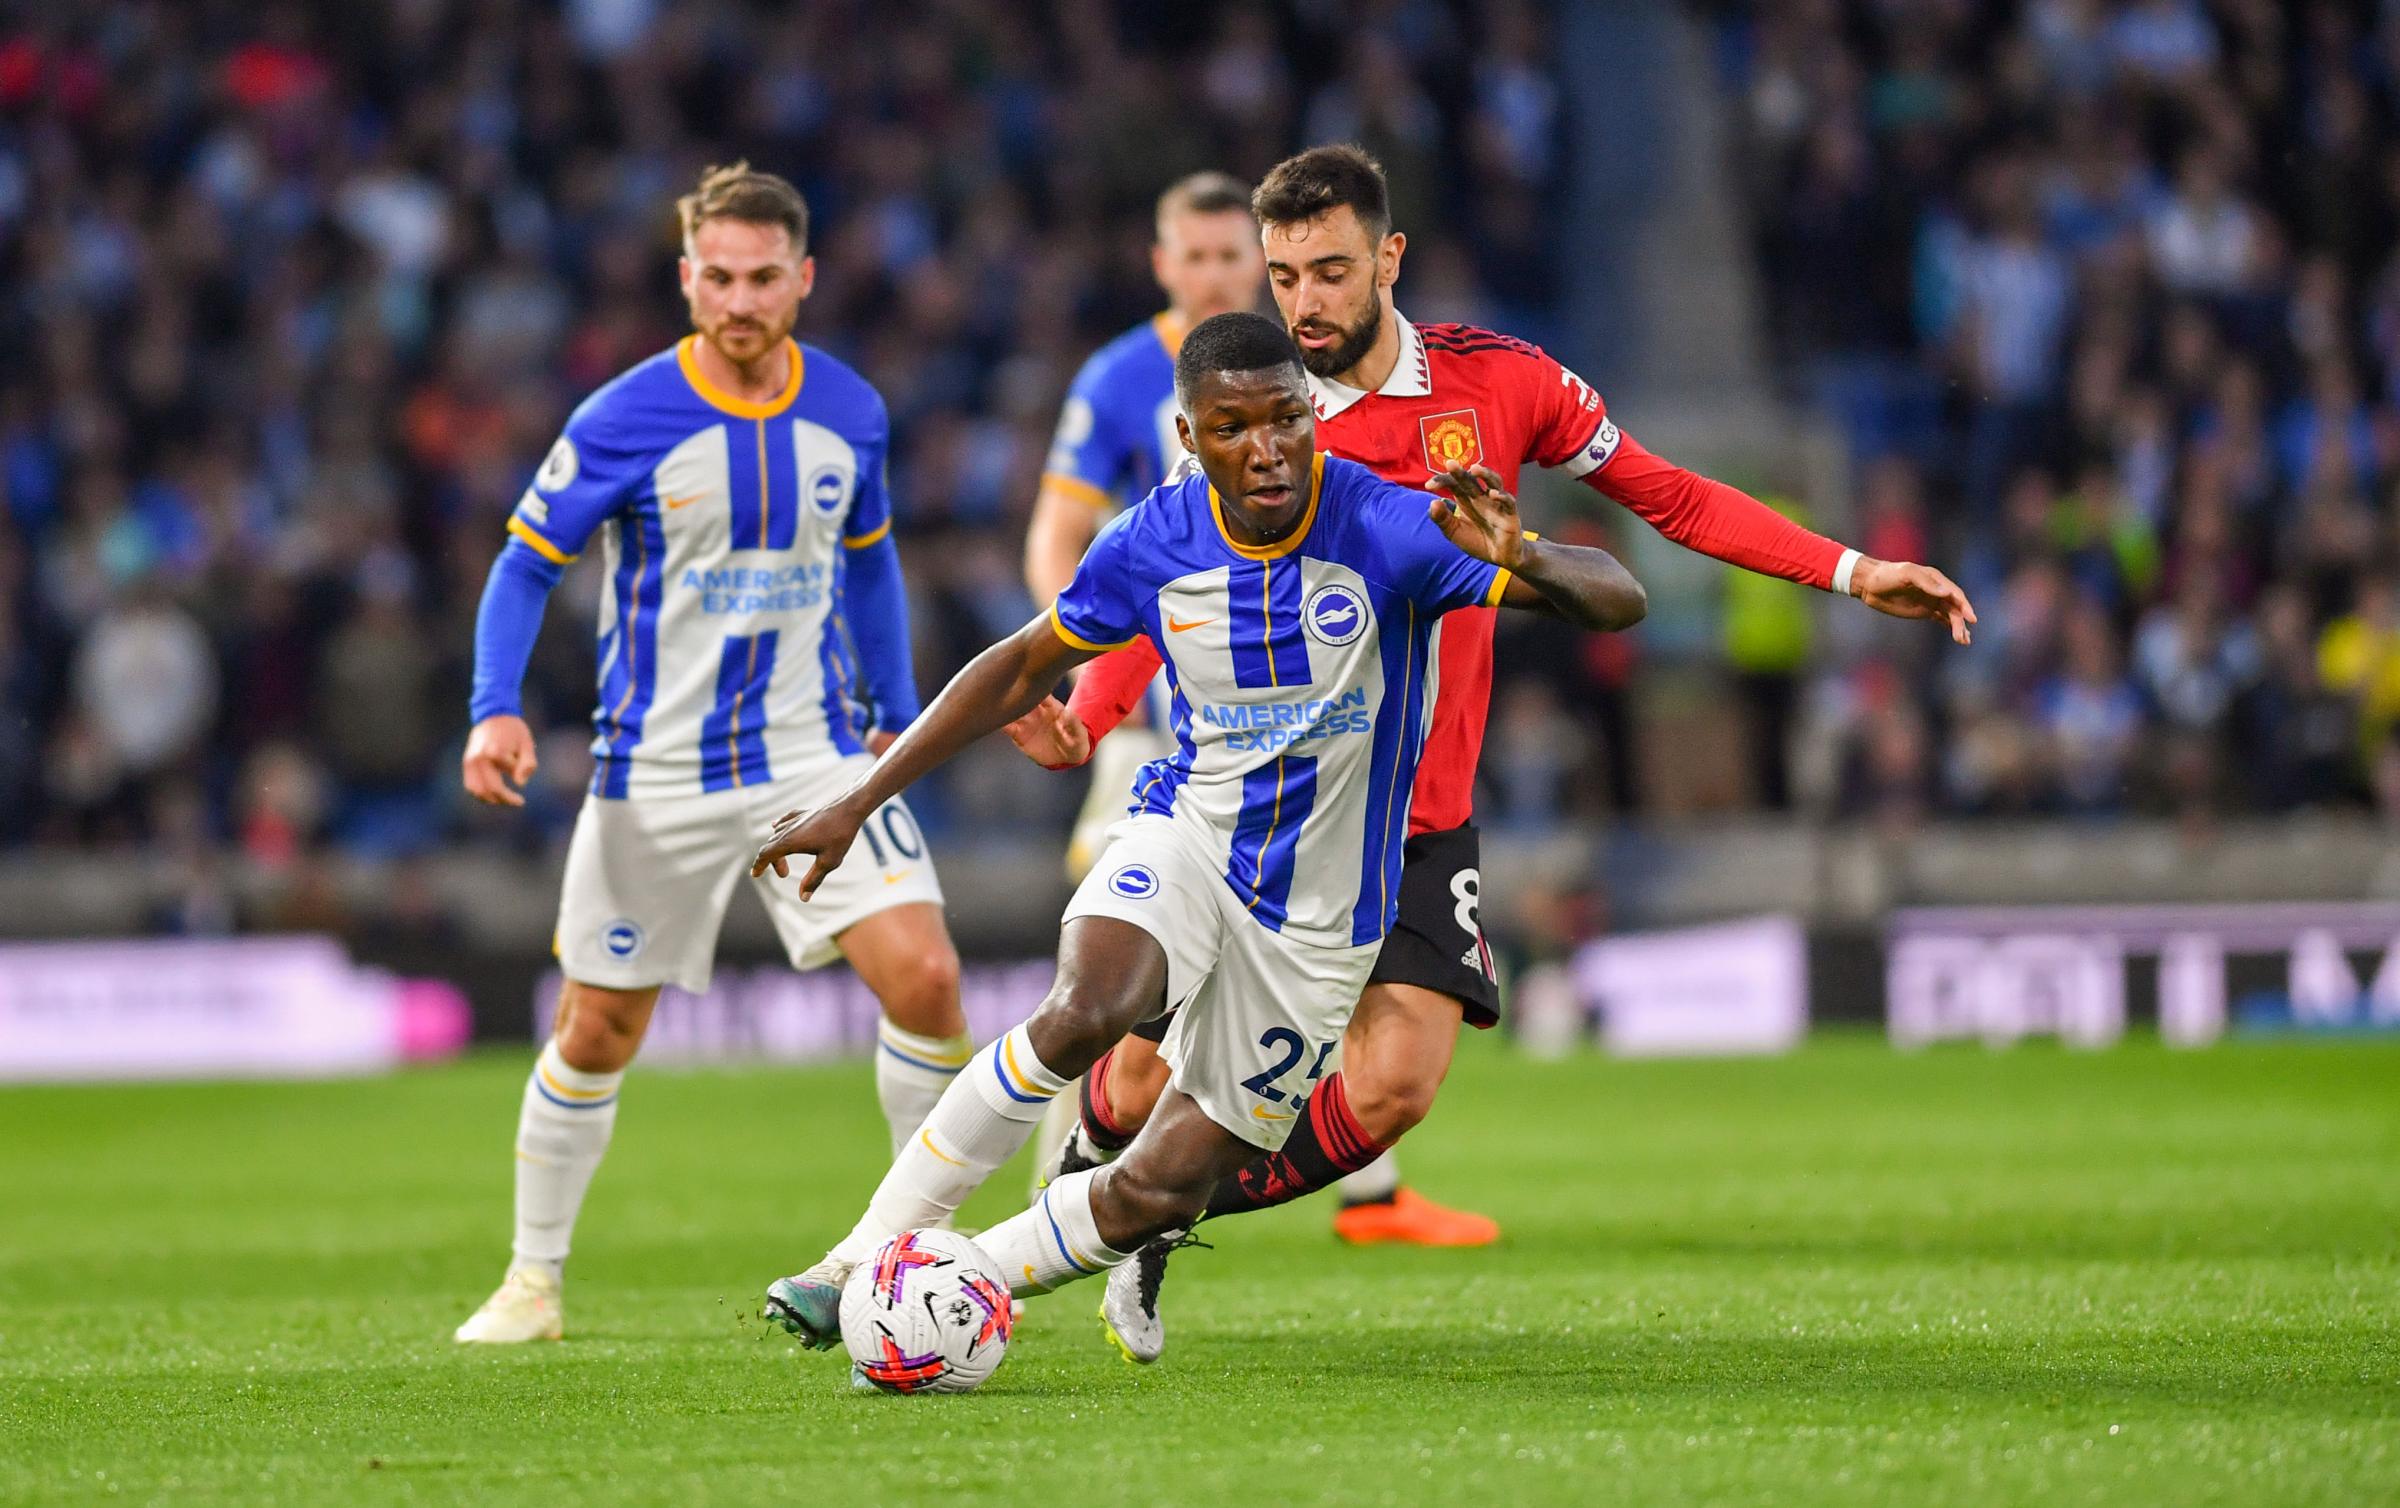 Moises Caicedo explains his right-back role for Brighton